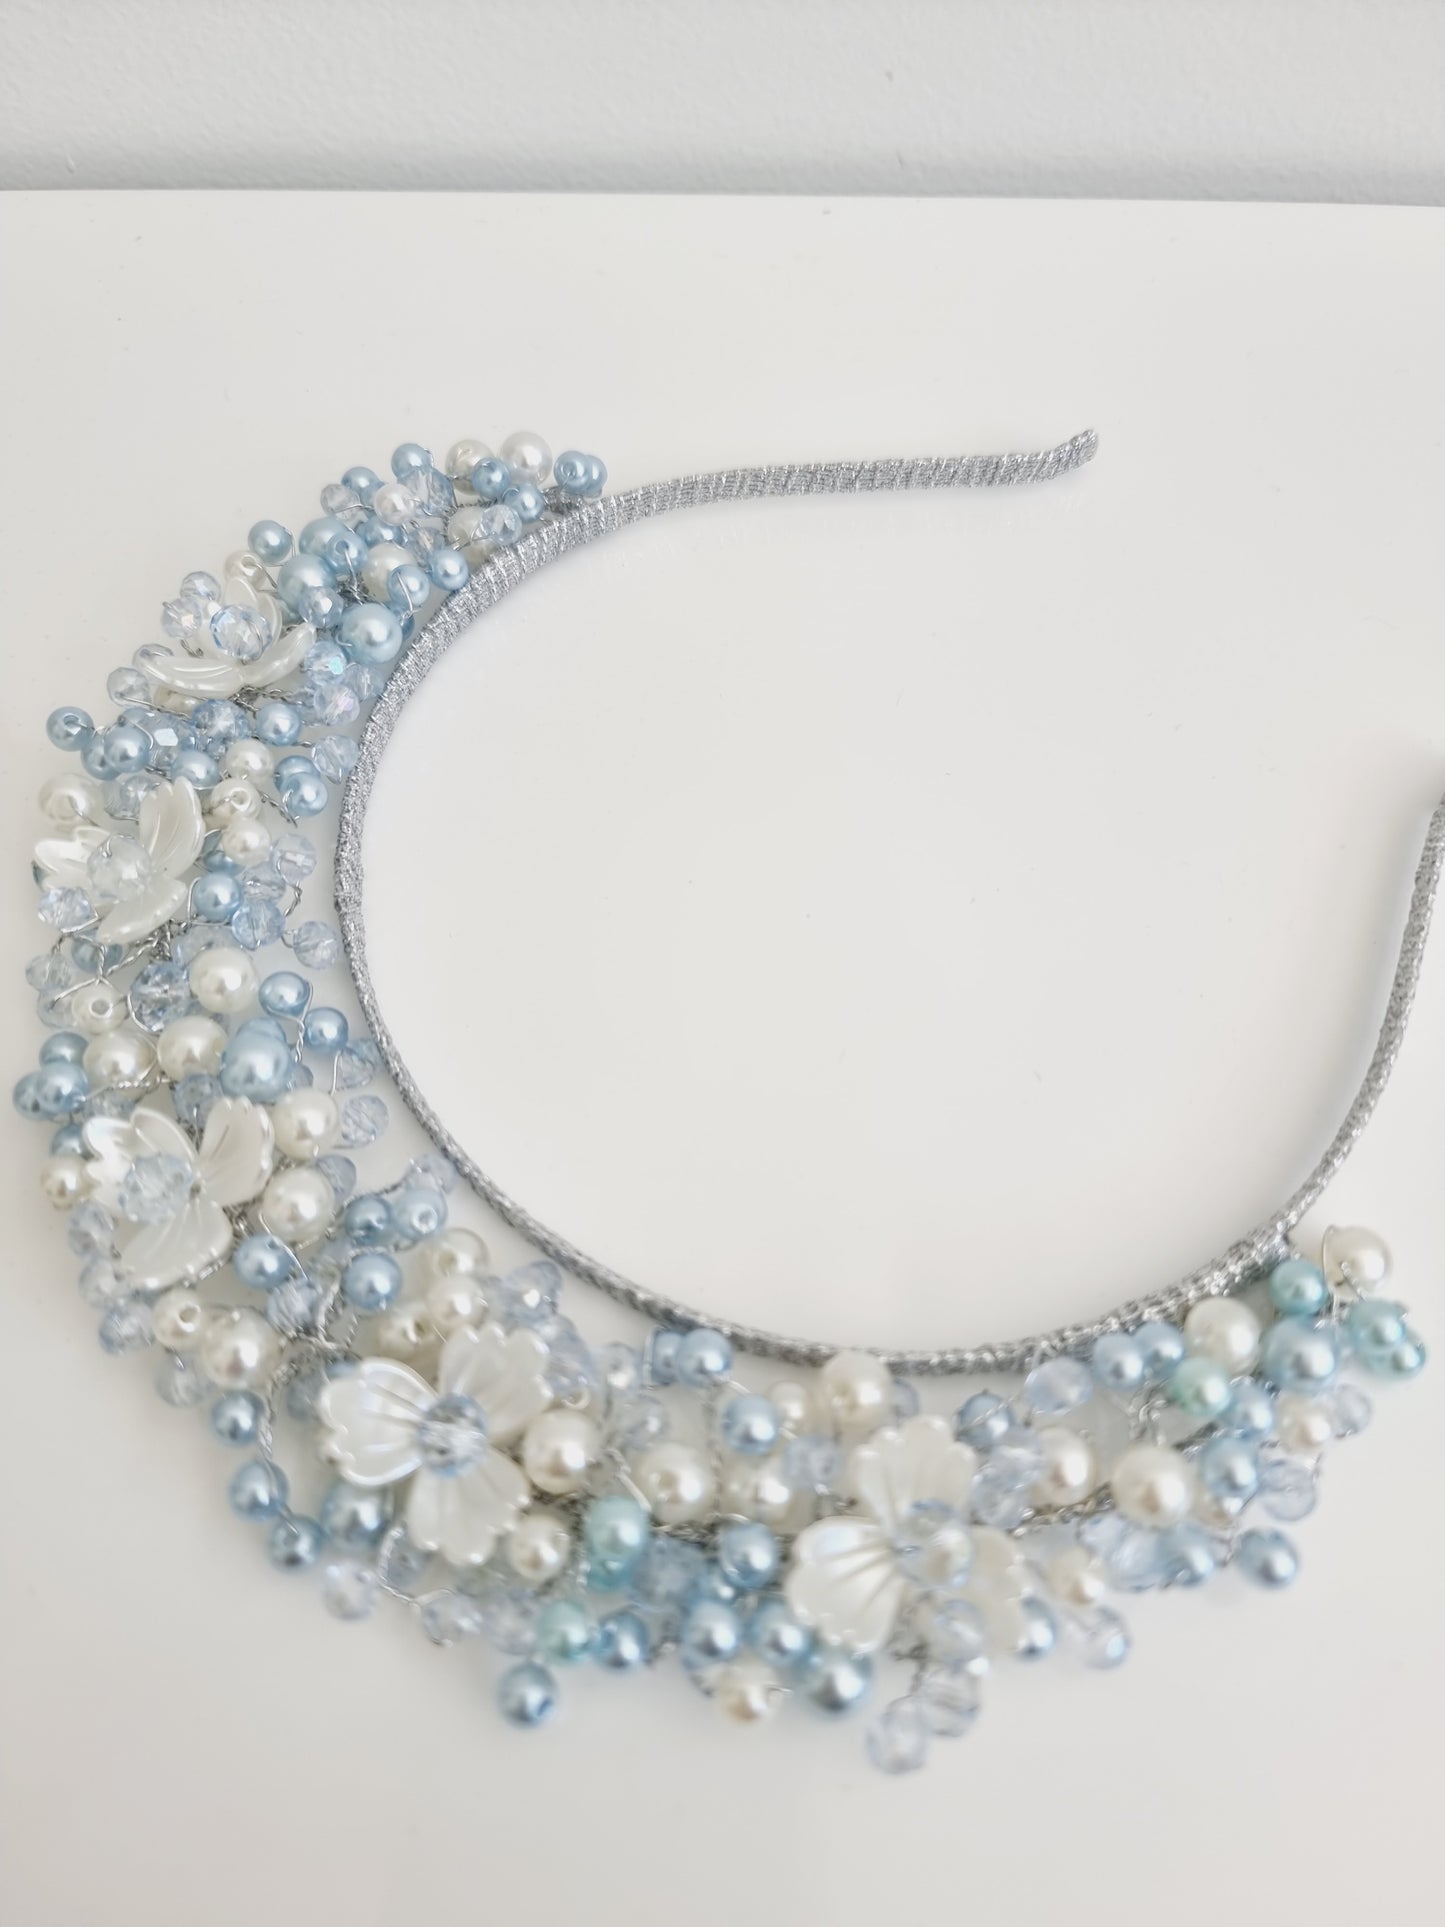 Miss Sienna. Womens pearl and crystal beaded headband fascinator in Pale Blue / white